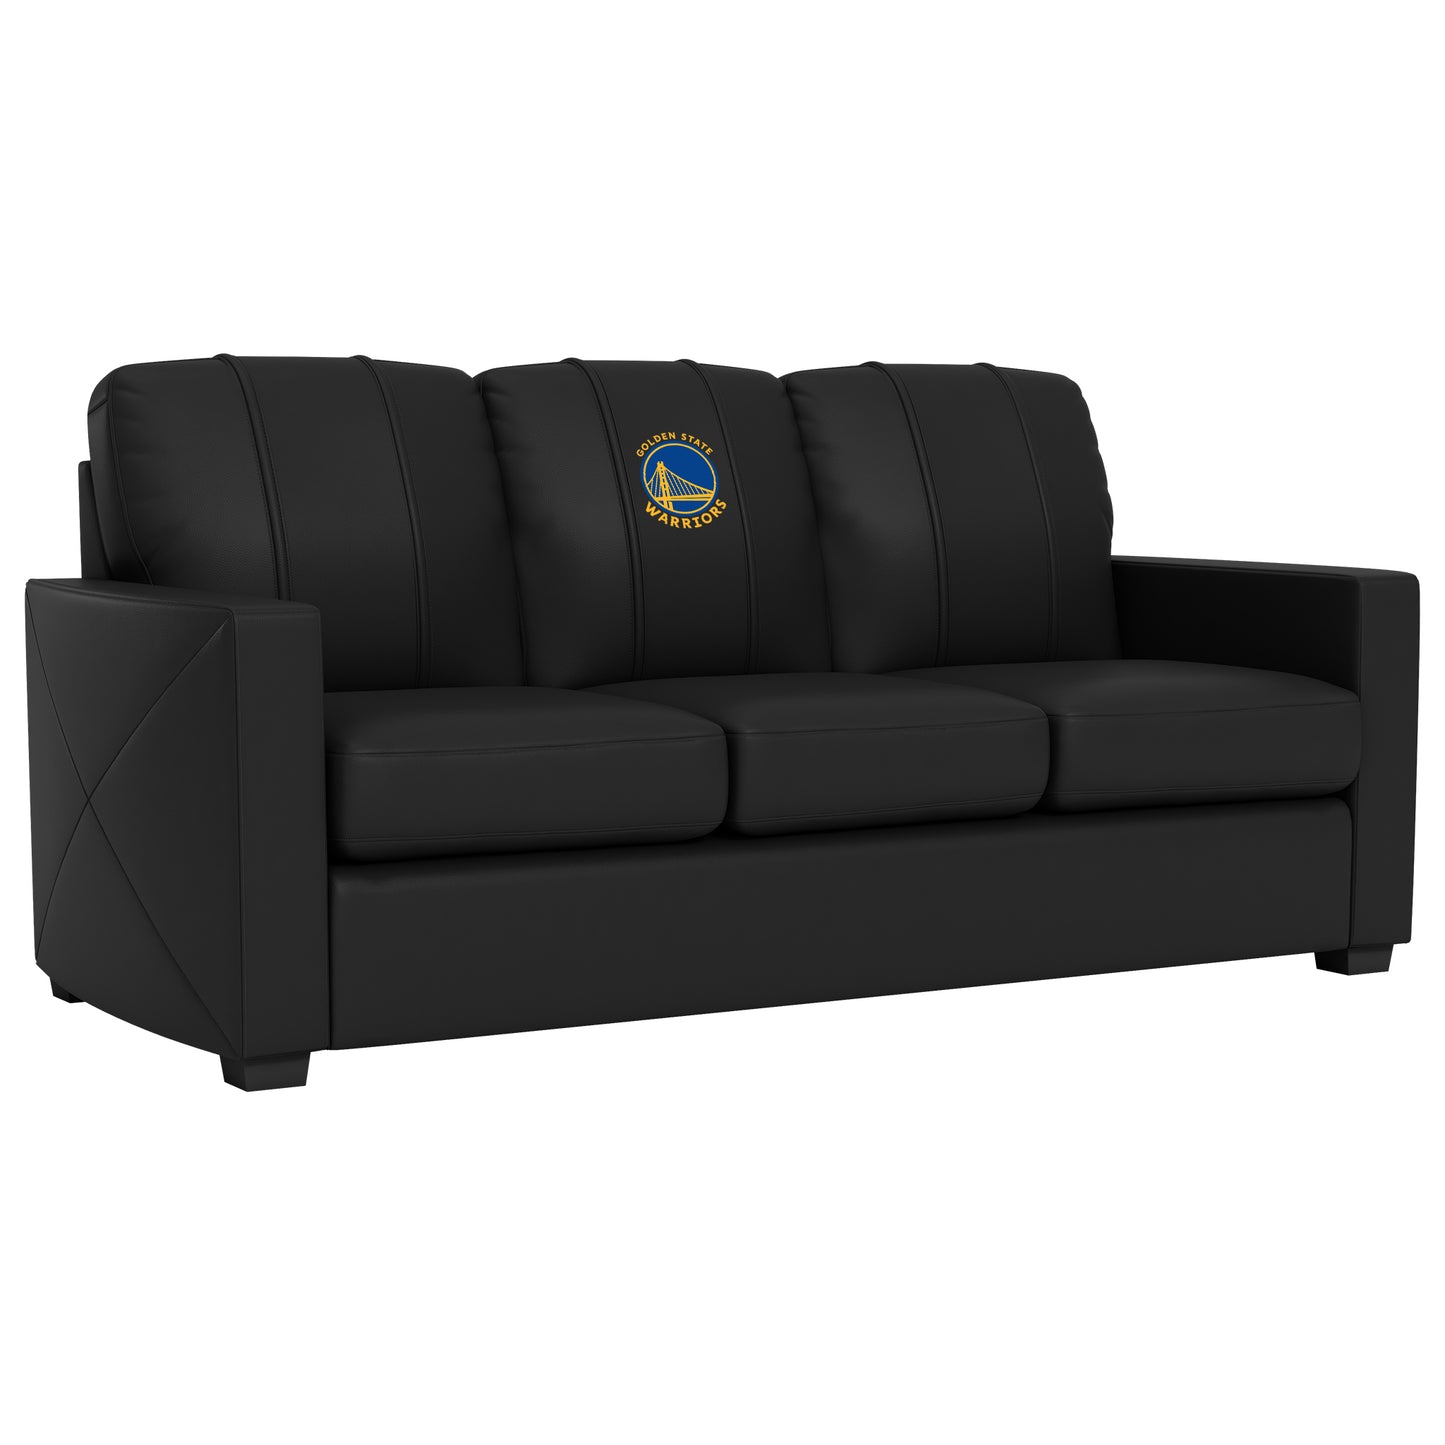 Silver Sofa with Golden State Warriors Global Logo